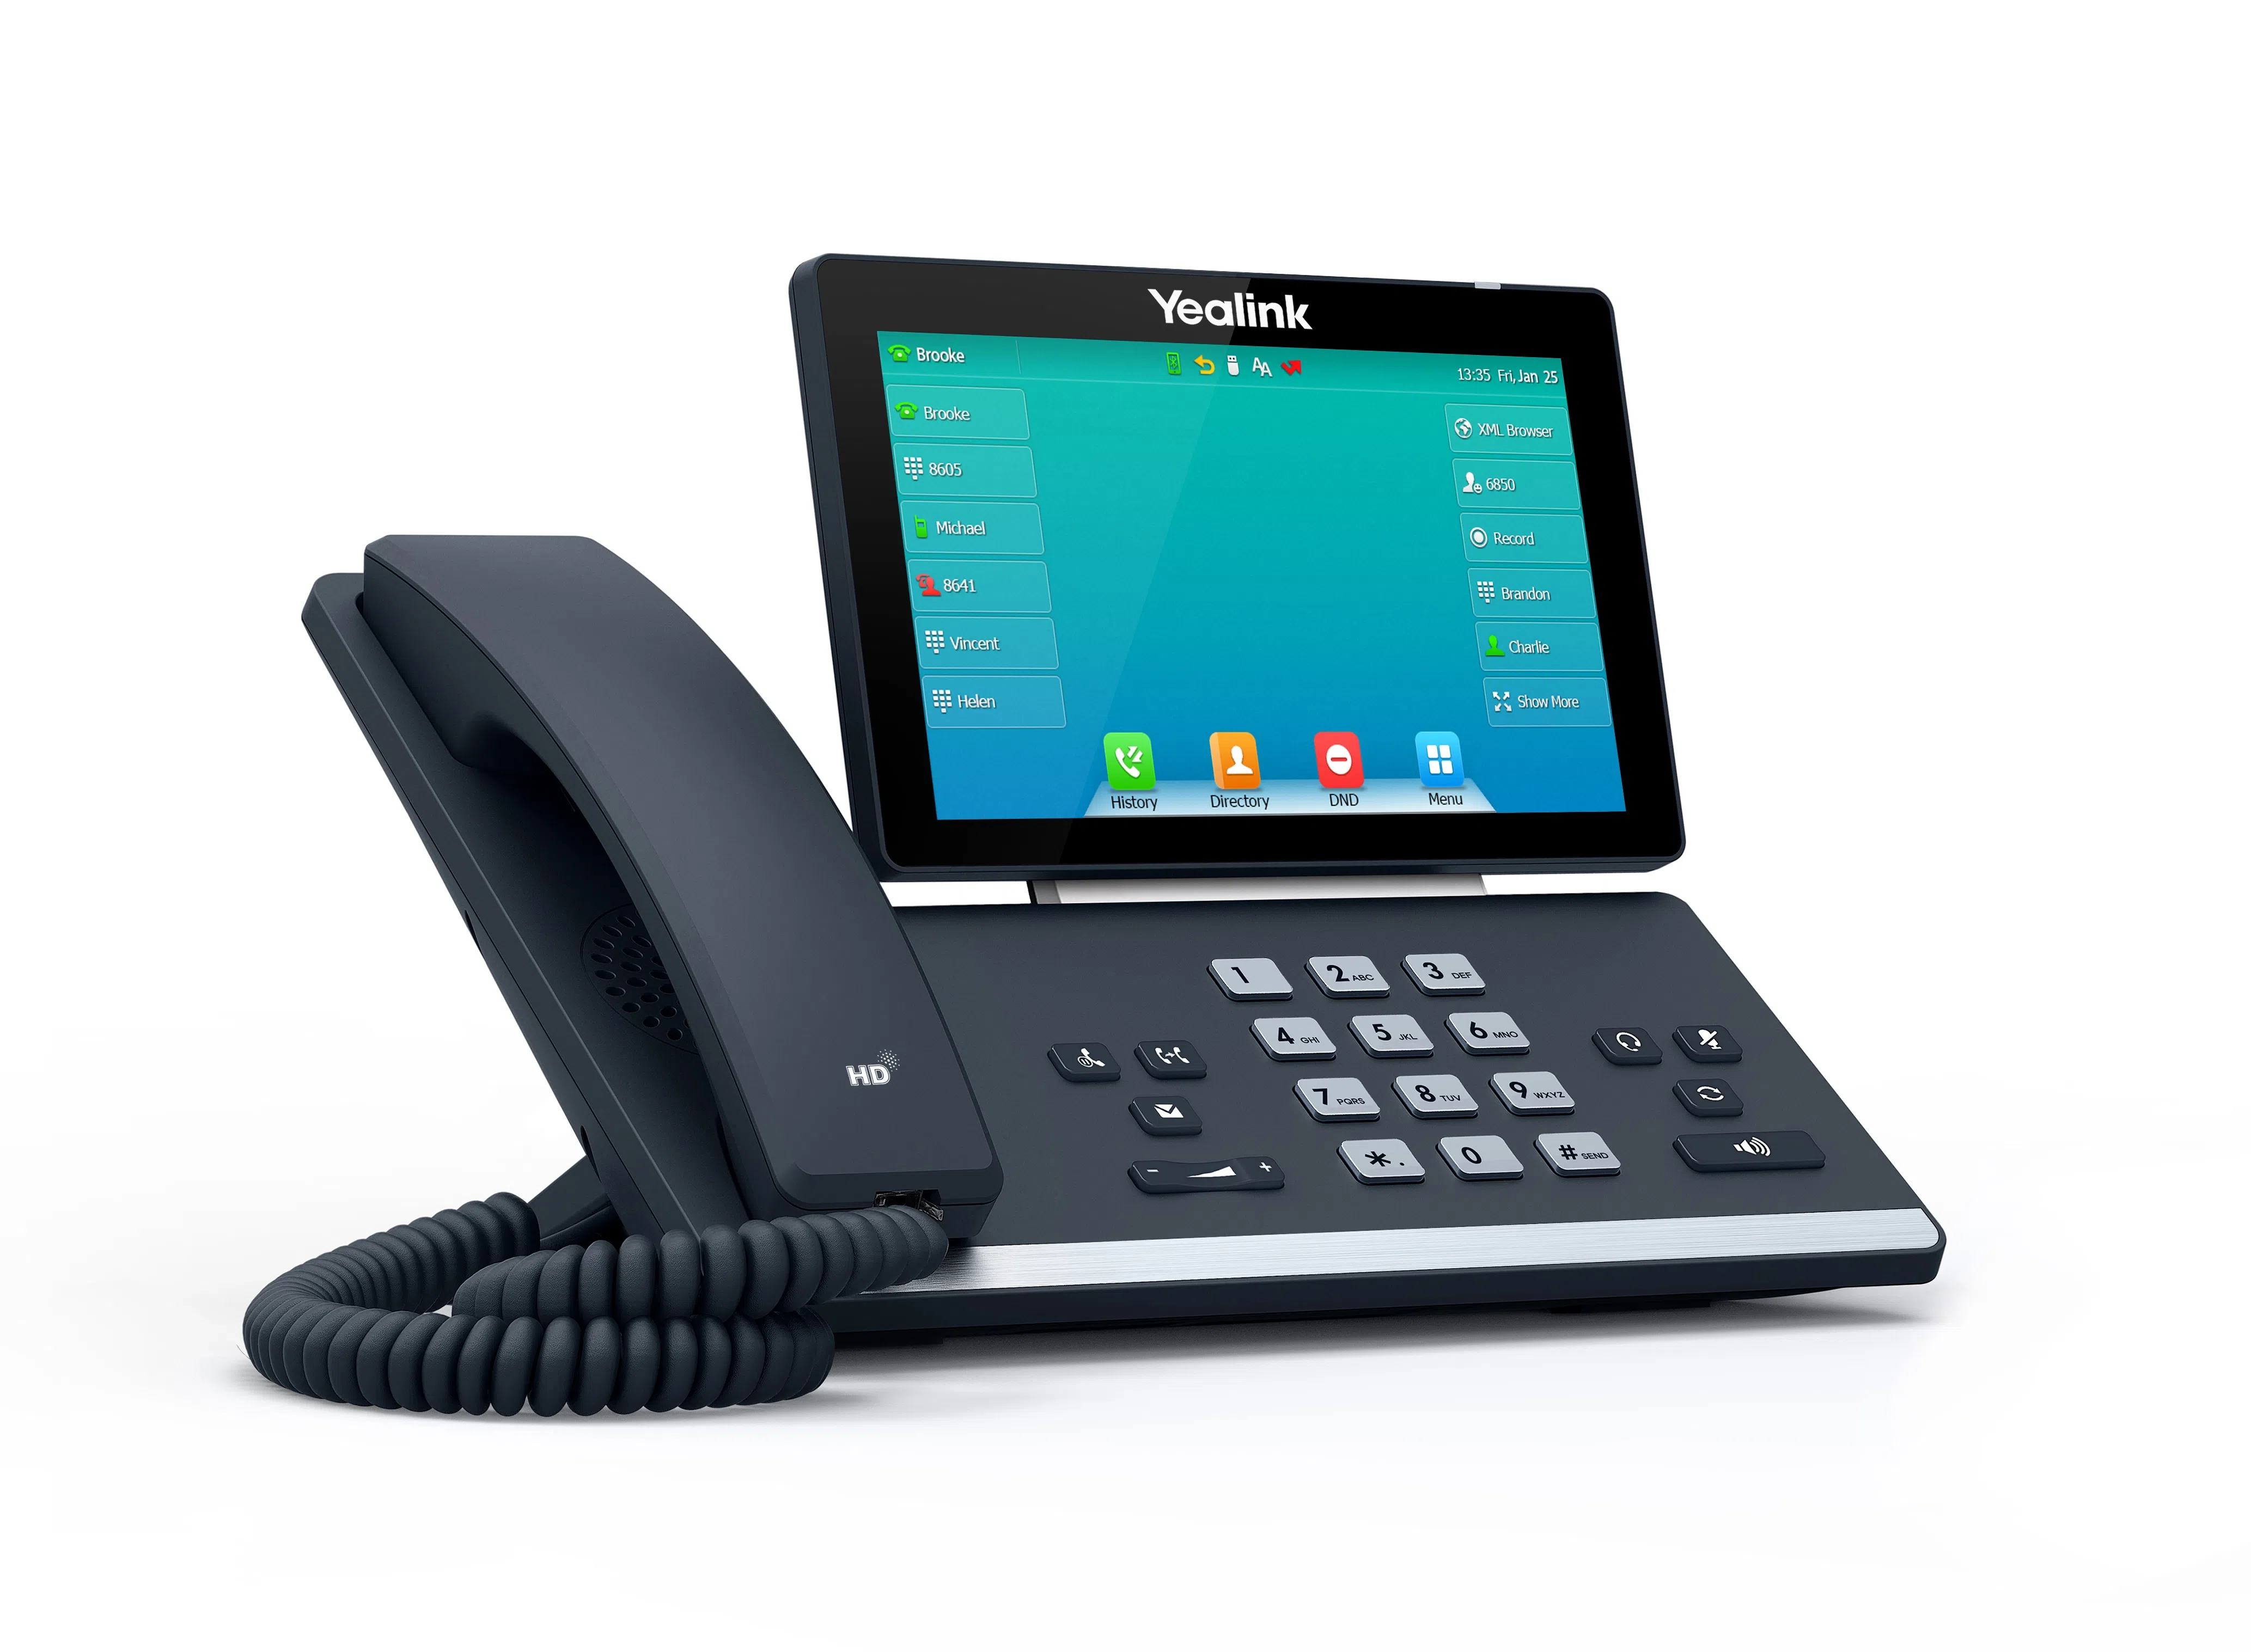 Is it possible to pair Yealink DECT handsets with the Yealink T57W Premium IP Phone?